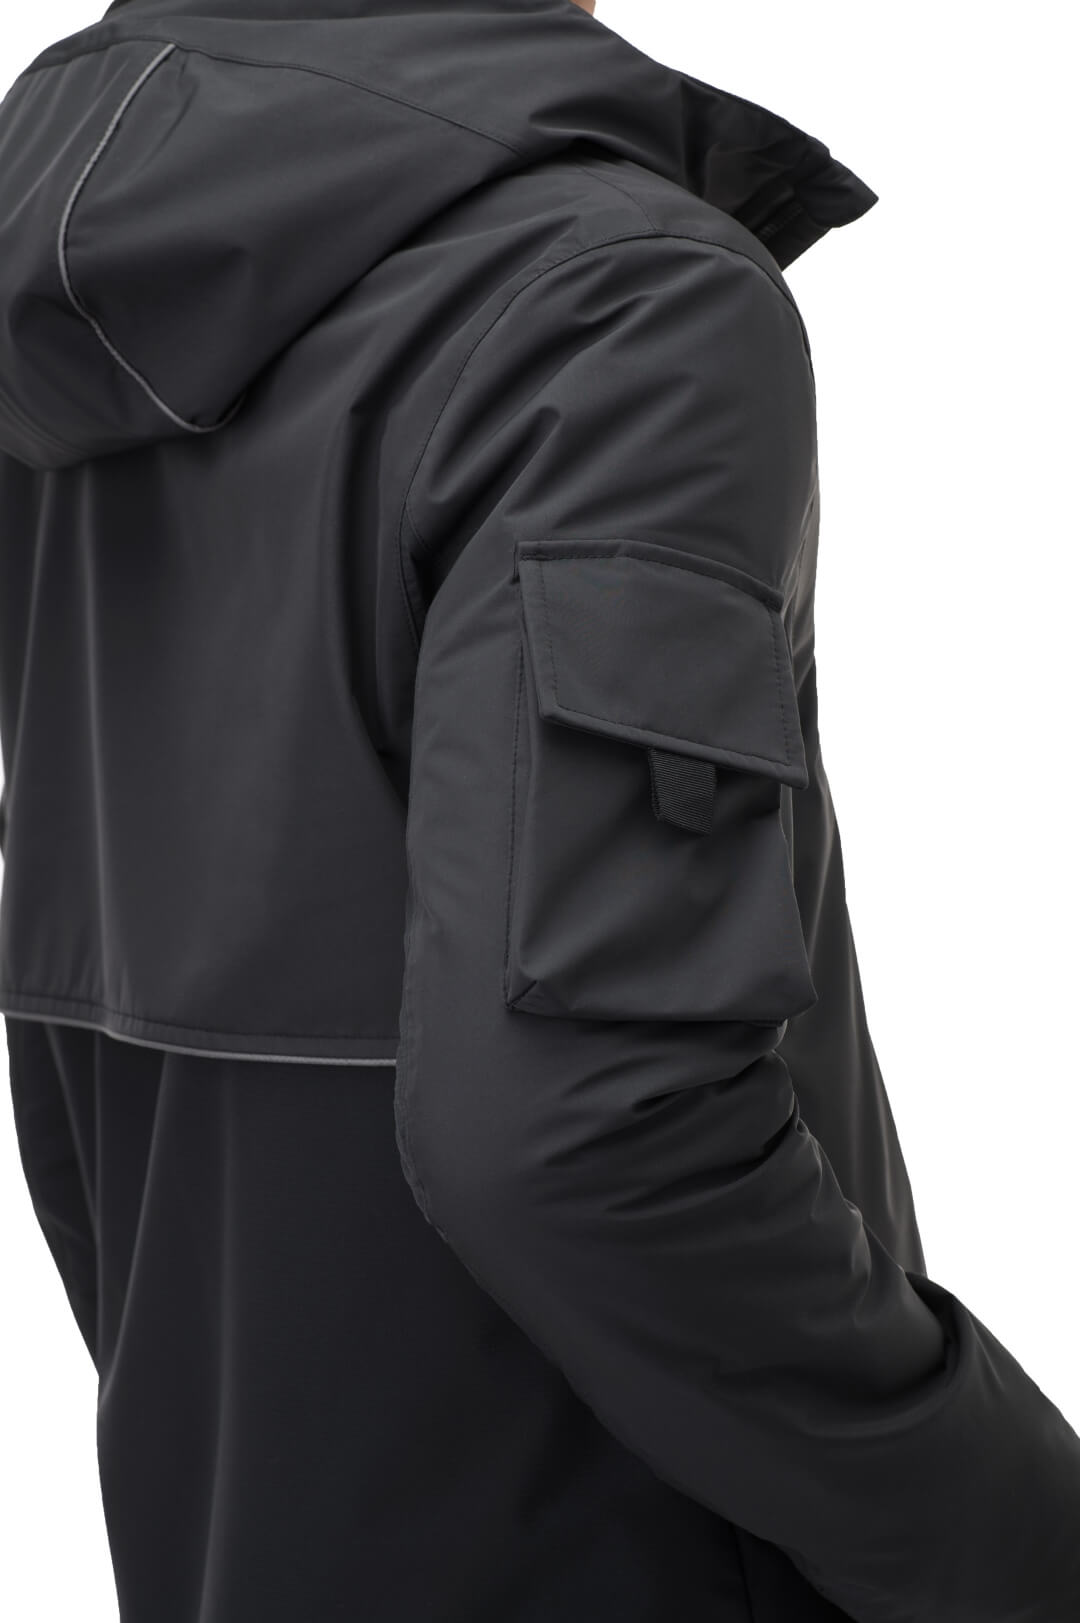 Alta Men's Performance Shell Jacket in hip length, Primaloft Gold Insulation Active+, chest and waist pockets, ventilation under arms, reflective detailing on hood and back, two-way front zipper, and non-removable hood with adjustable drawstrings, in Black